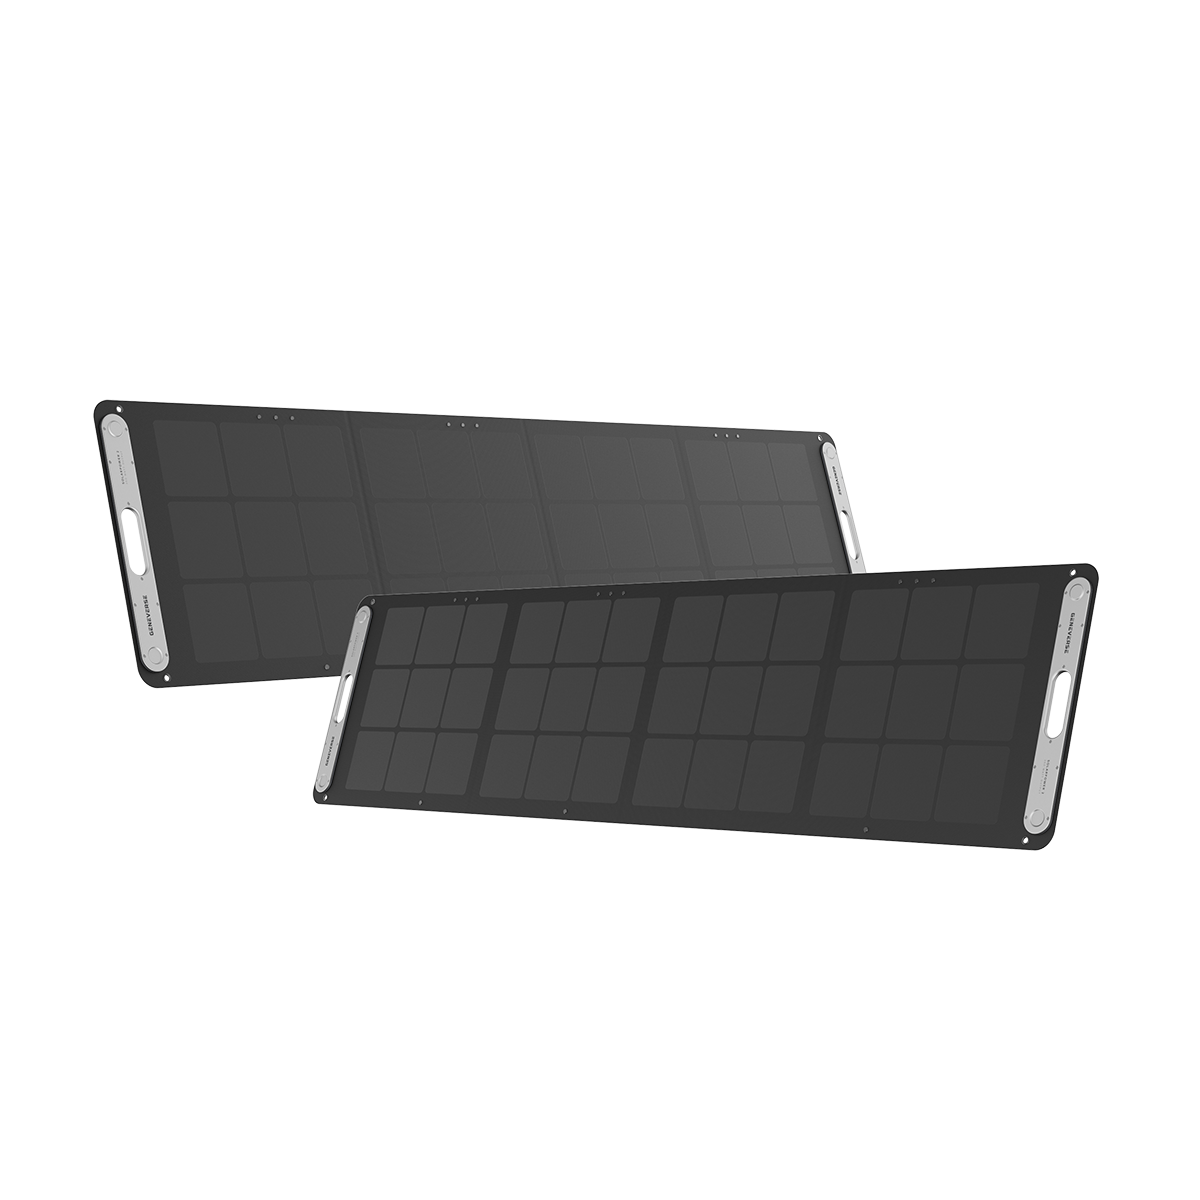 SolarPower 2: All-Weather Portable Solar Panels (200W Max Output/Panel), 2 Panels (400W Total Max Output)